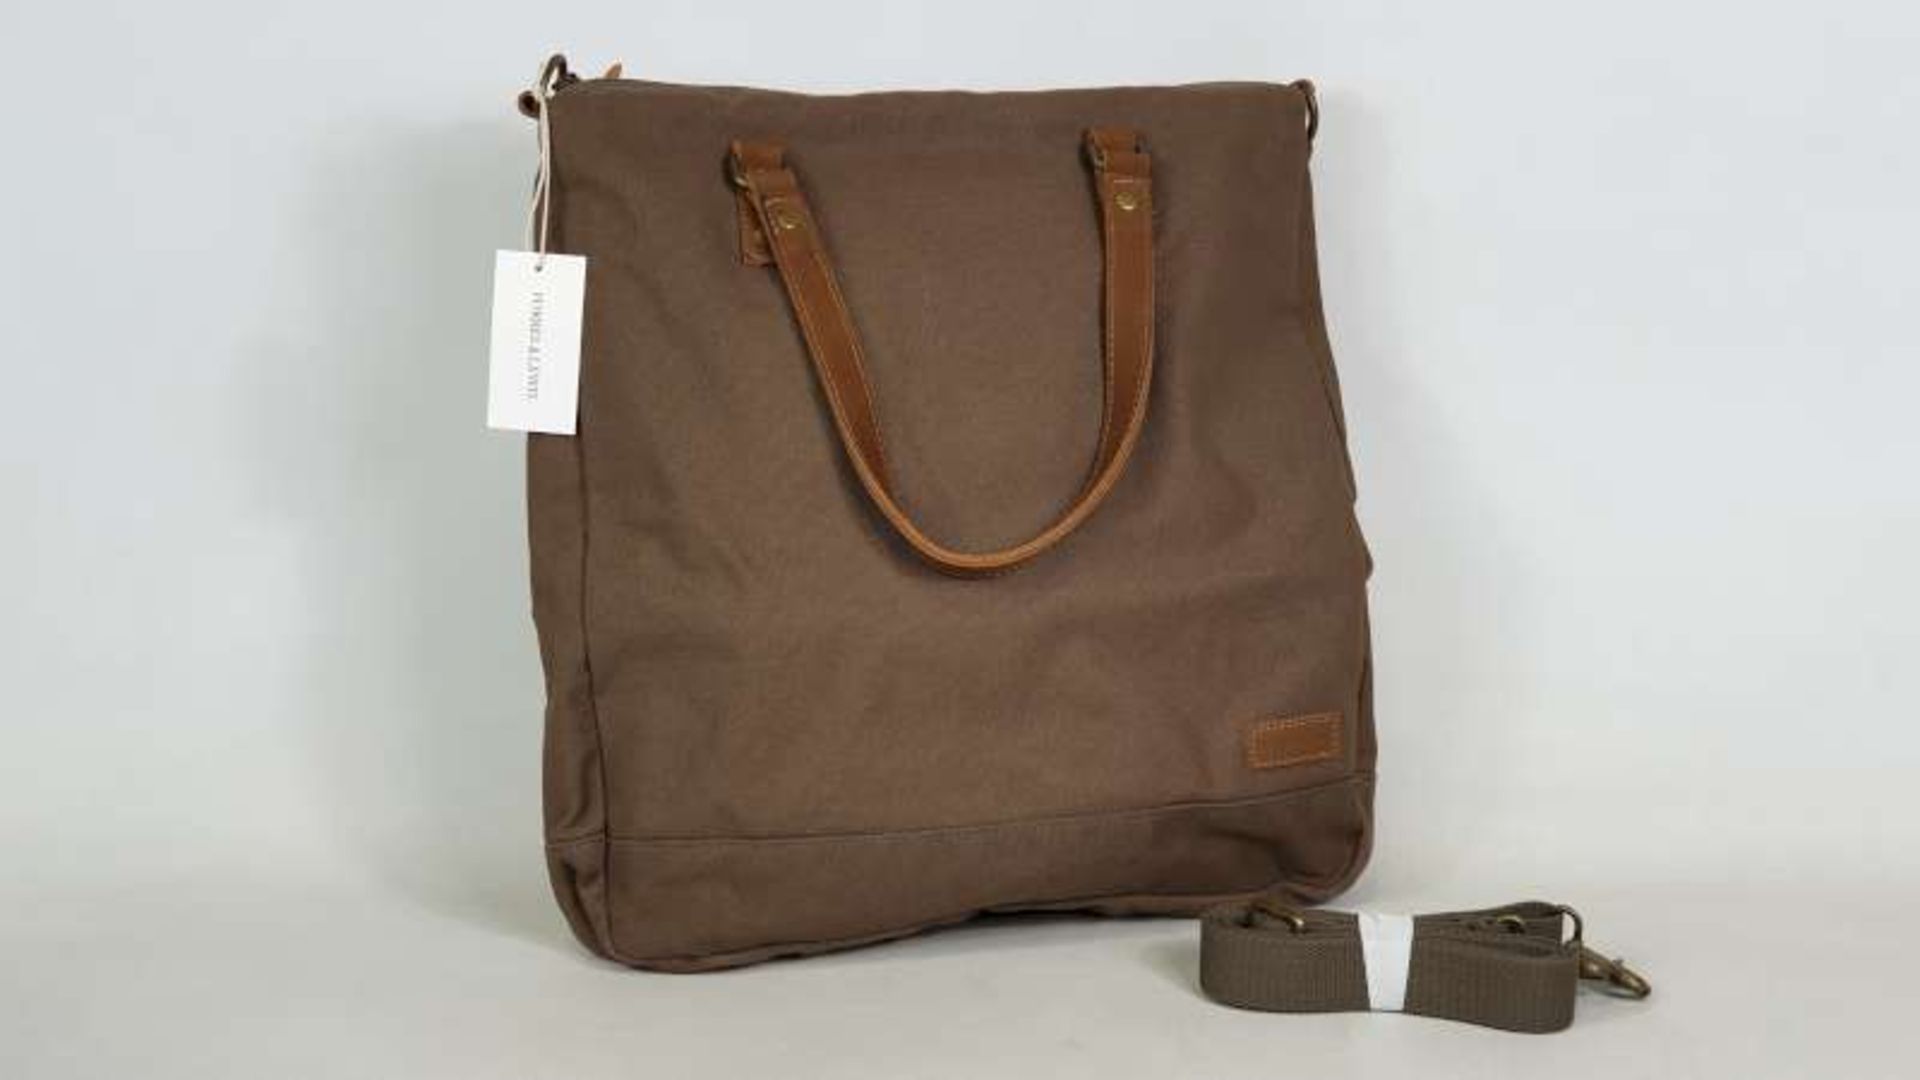 4 X BRAND NEW FORBES AND LEWIS CANVAS AND LEATHER FOXTON TOTE BAGS VARIOUS COLOURS